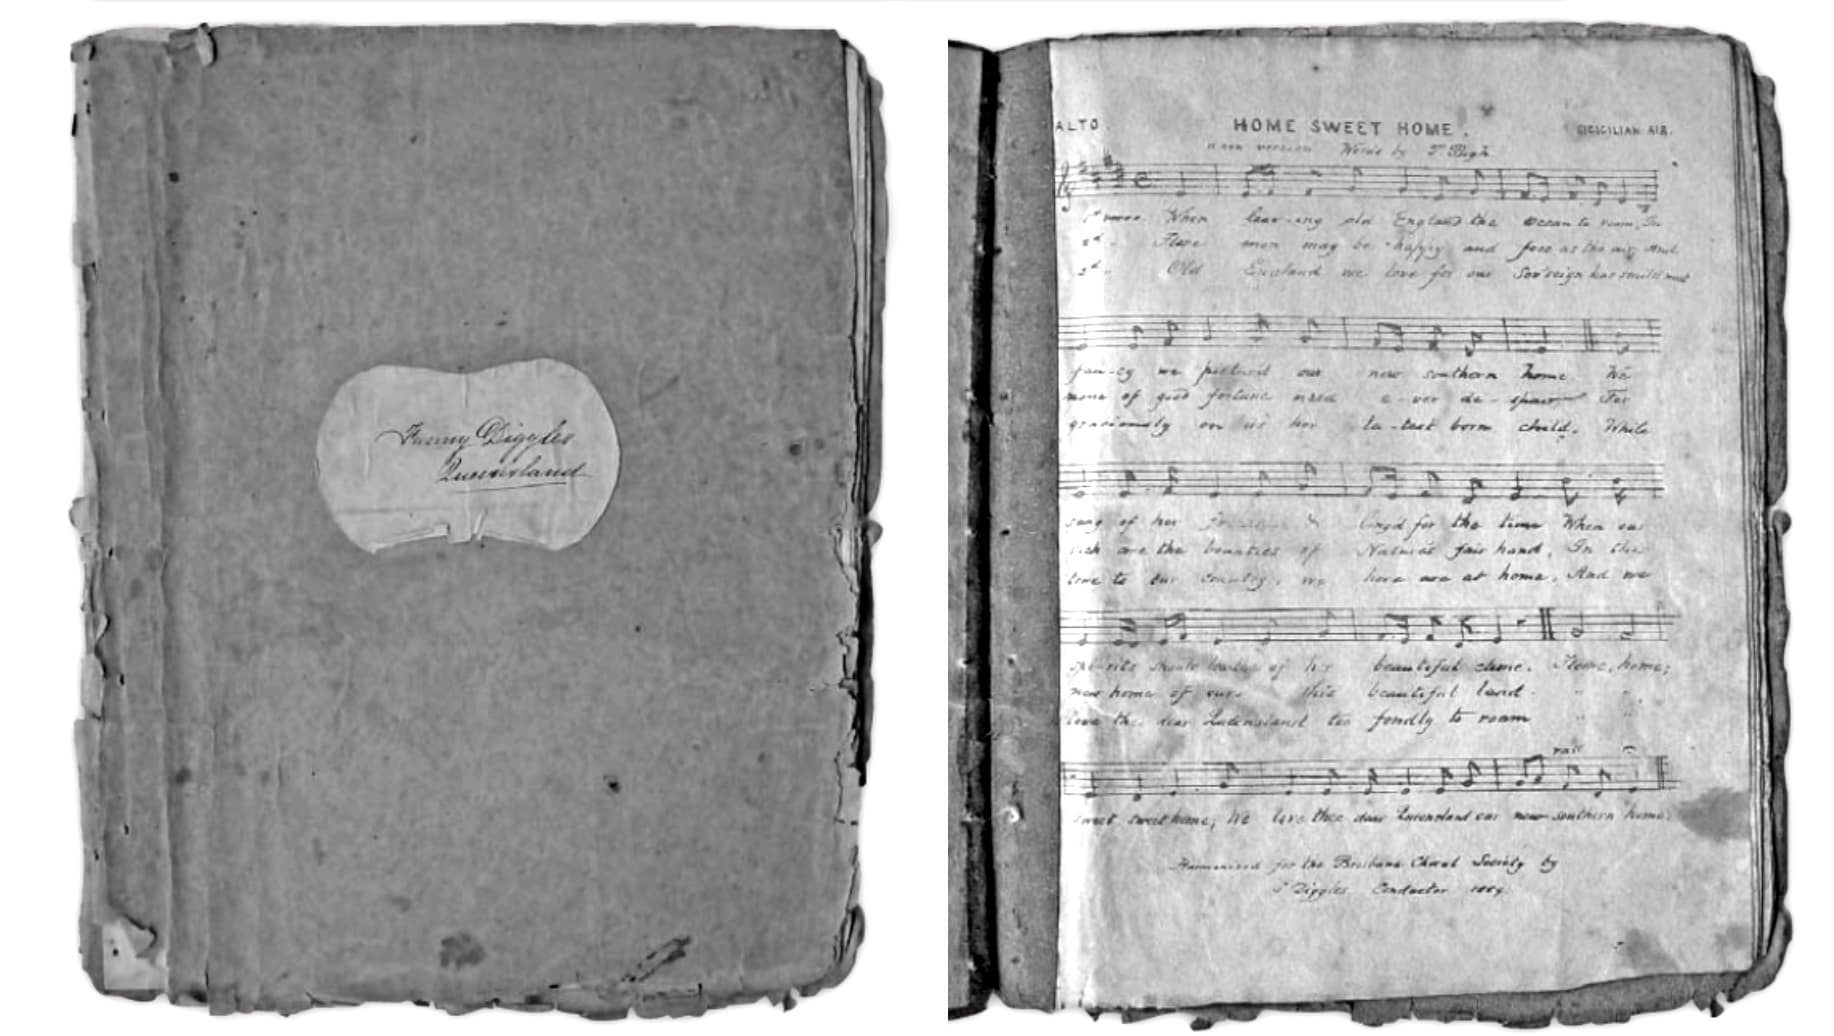 Brisbane Choral Society alto partbook, 1859; Fanny Diggles's name on cover, and Slivester Diggles's arrangement of Bishop's Home sweet home